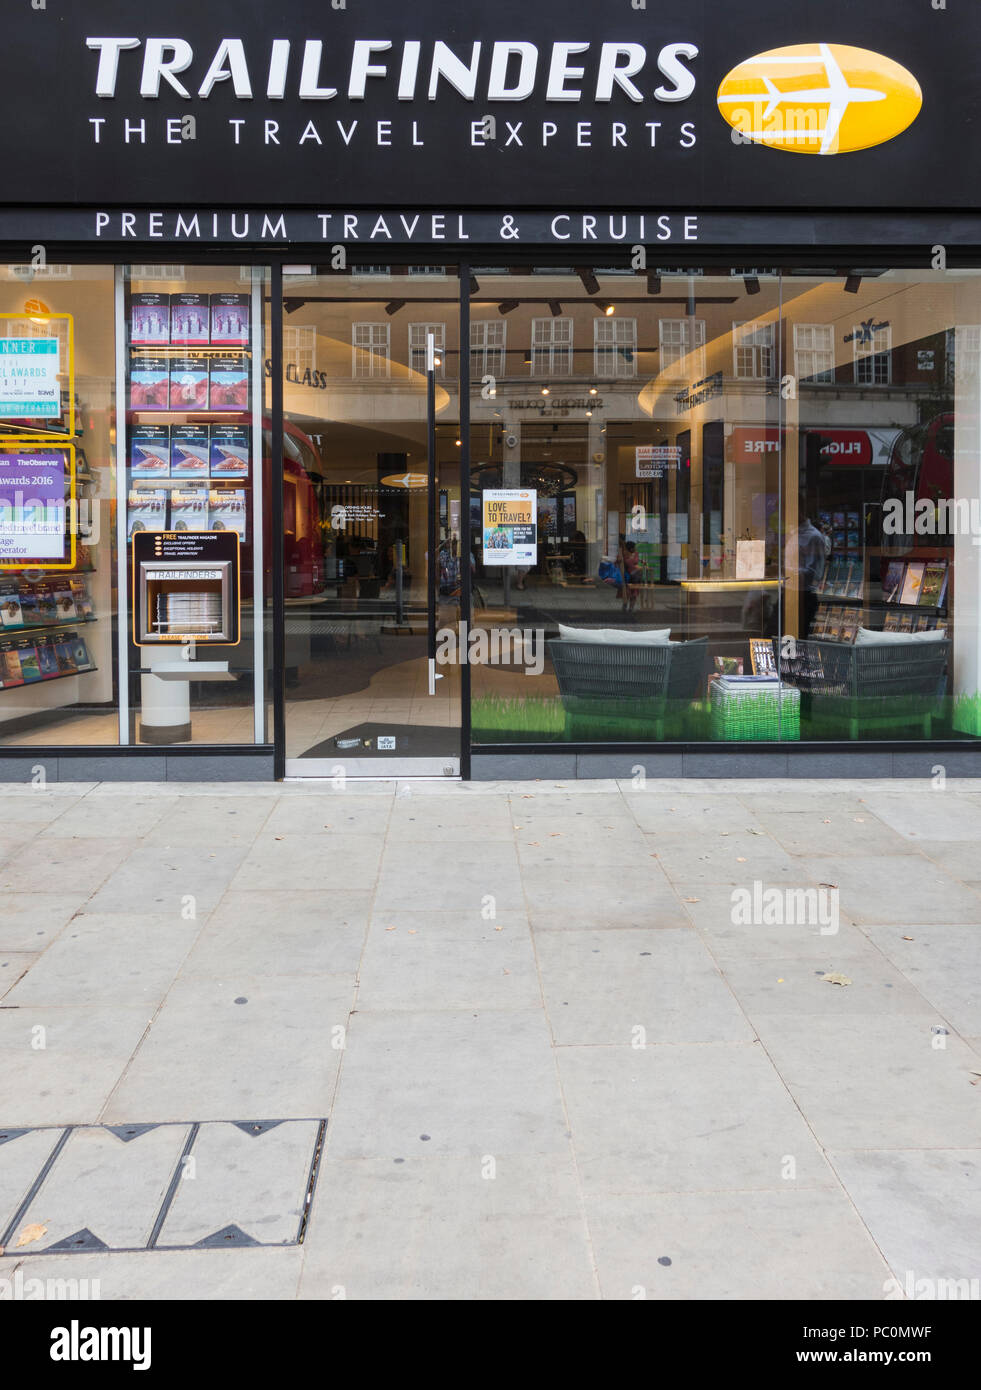 Trailfinders the independently owned Travel Experts company on Kensington High Street, London, UK Stock Photo